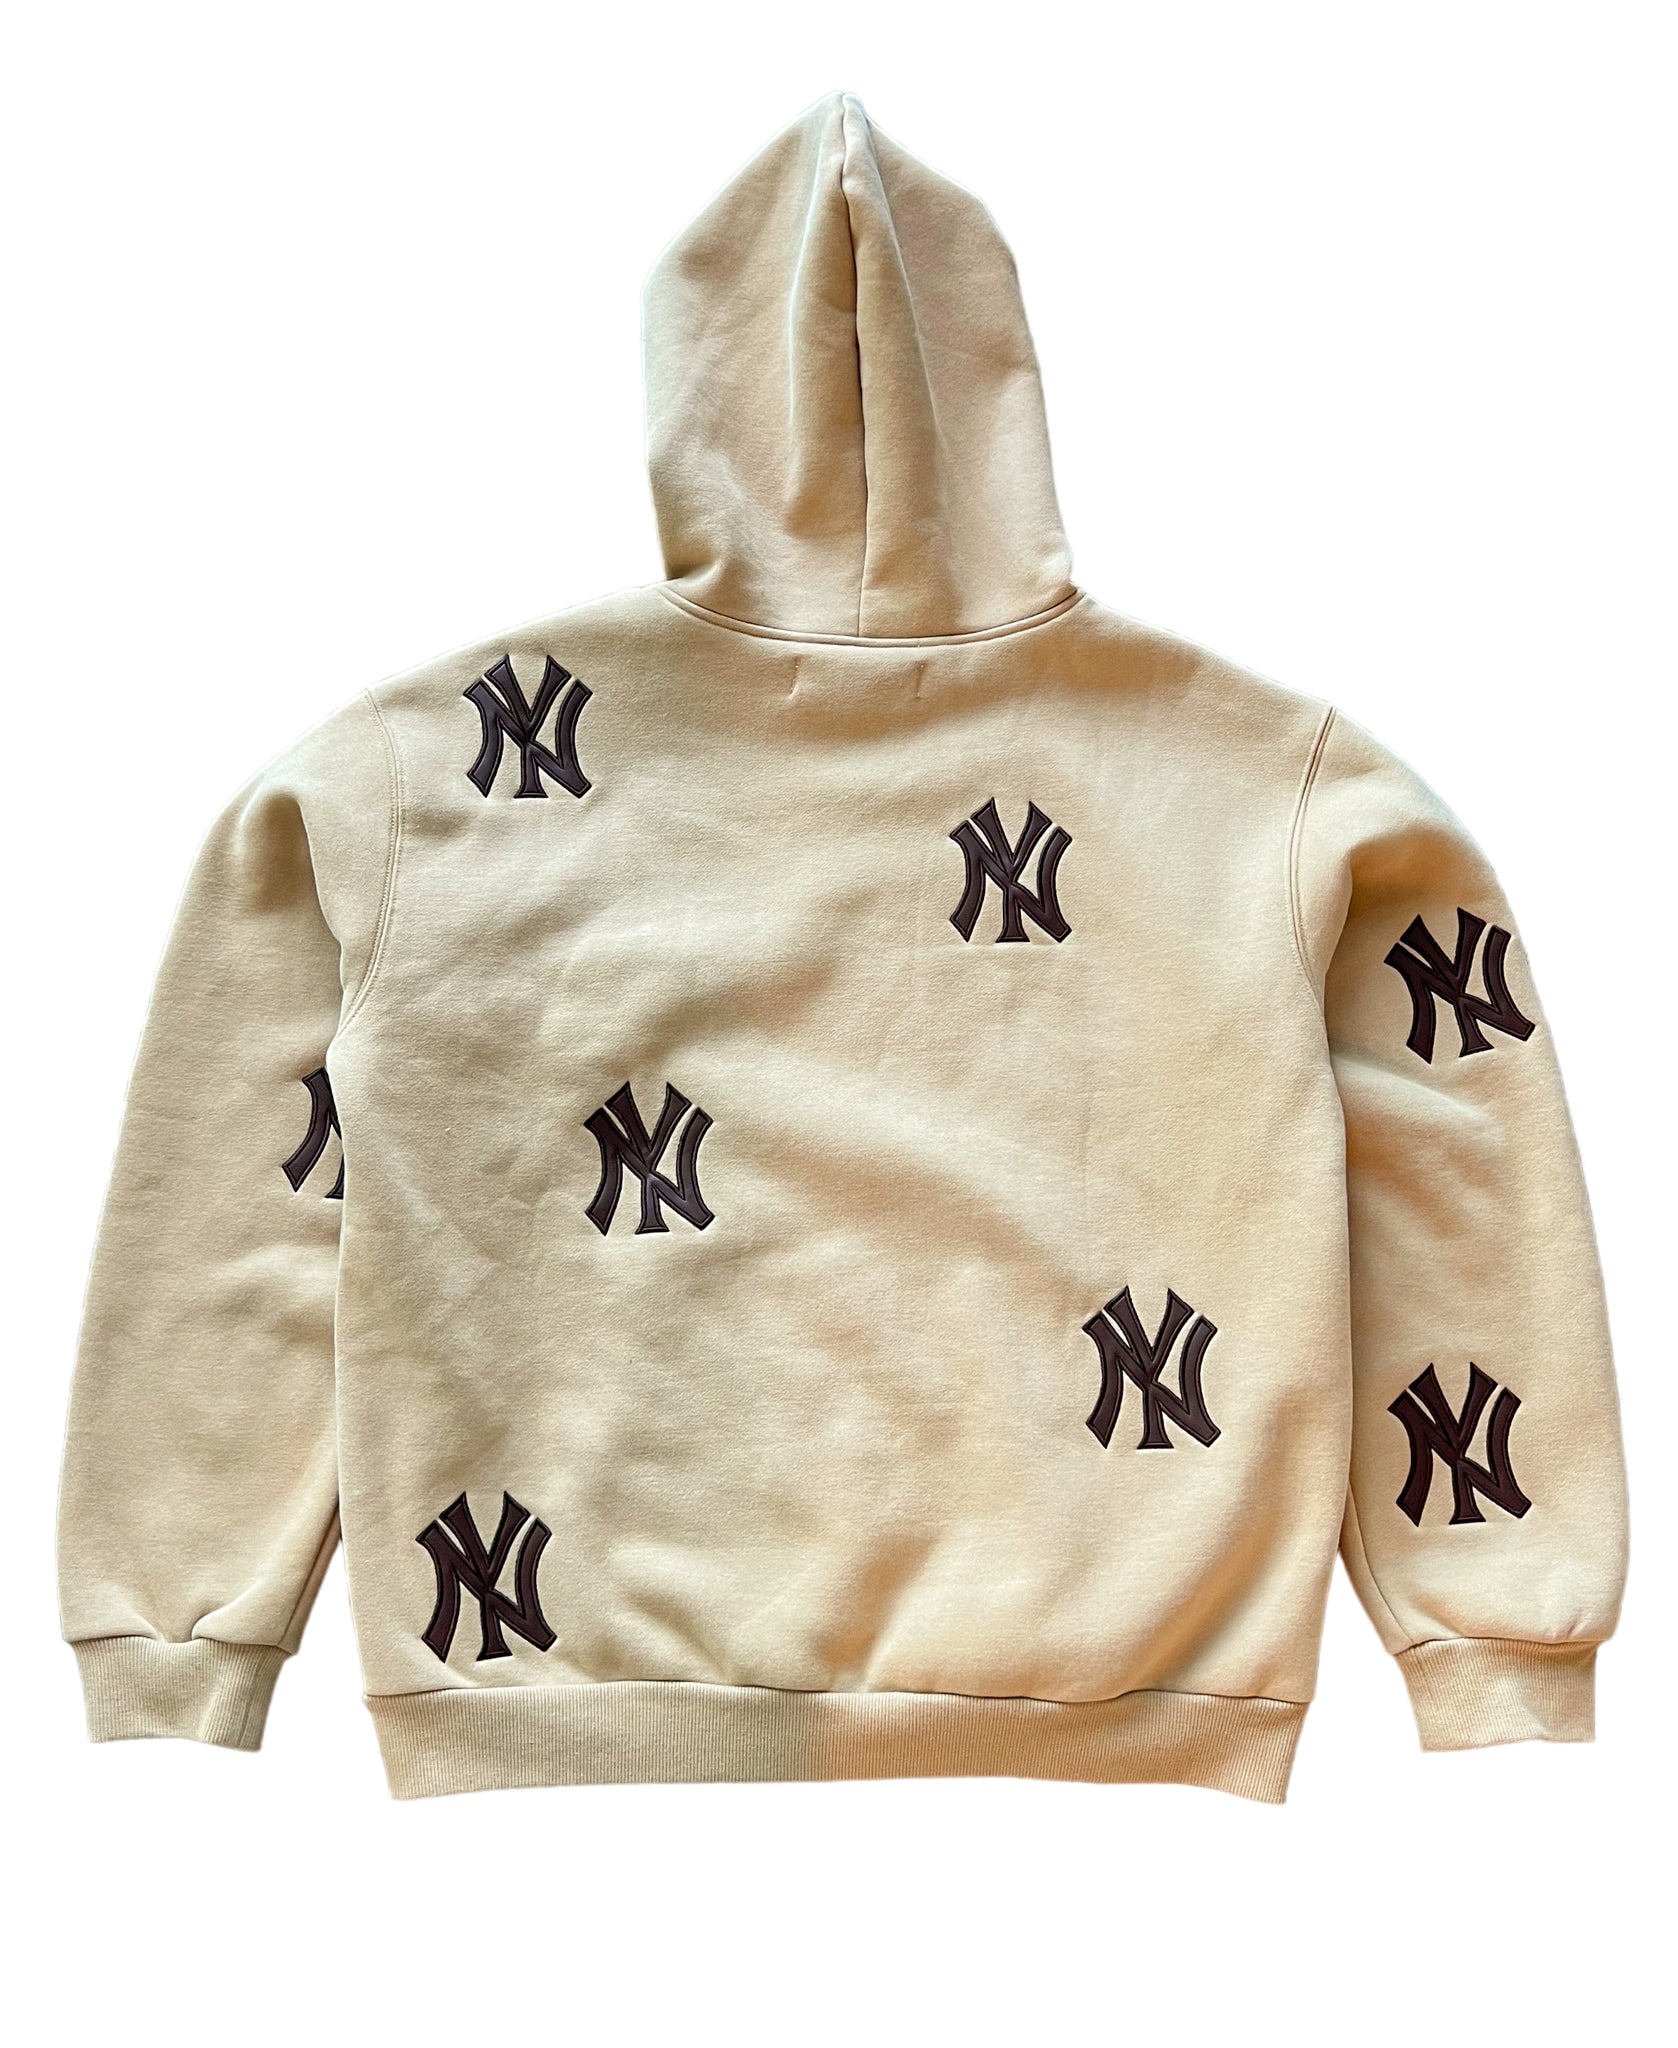 NY Patch Hoodie - Tan